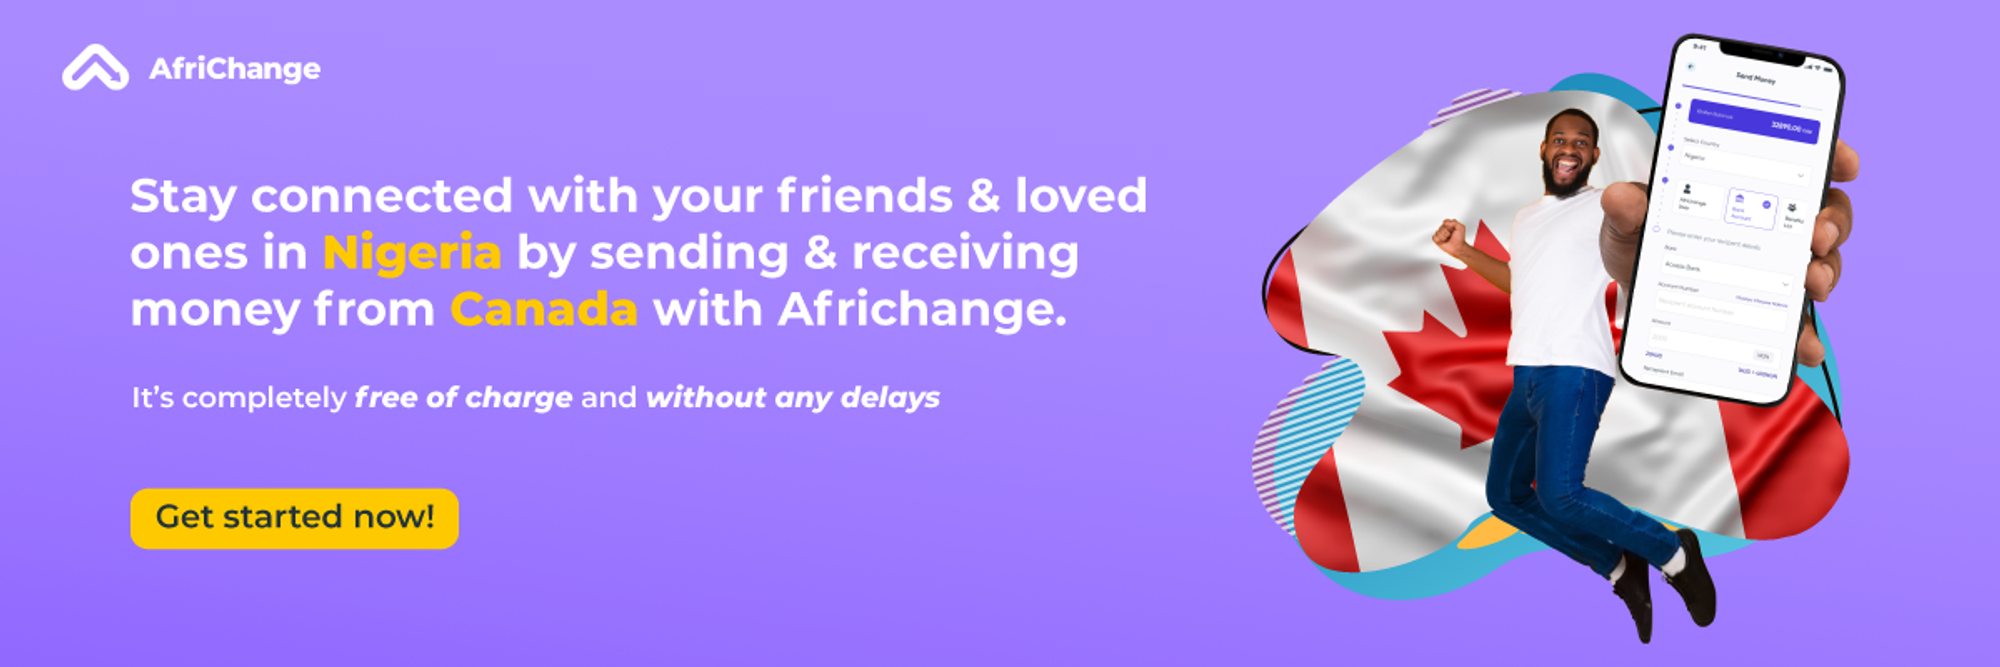 Stay connected with your loved ones in Nigeria by sending and receiving money from Canada